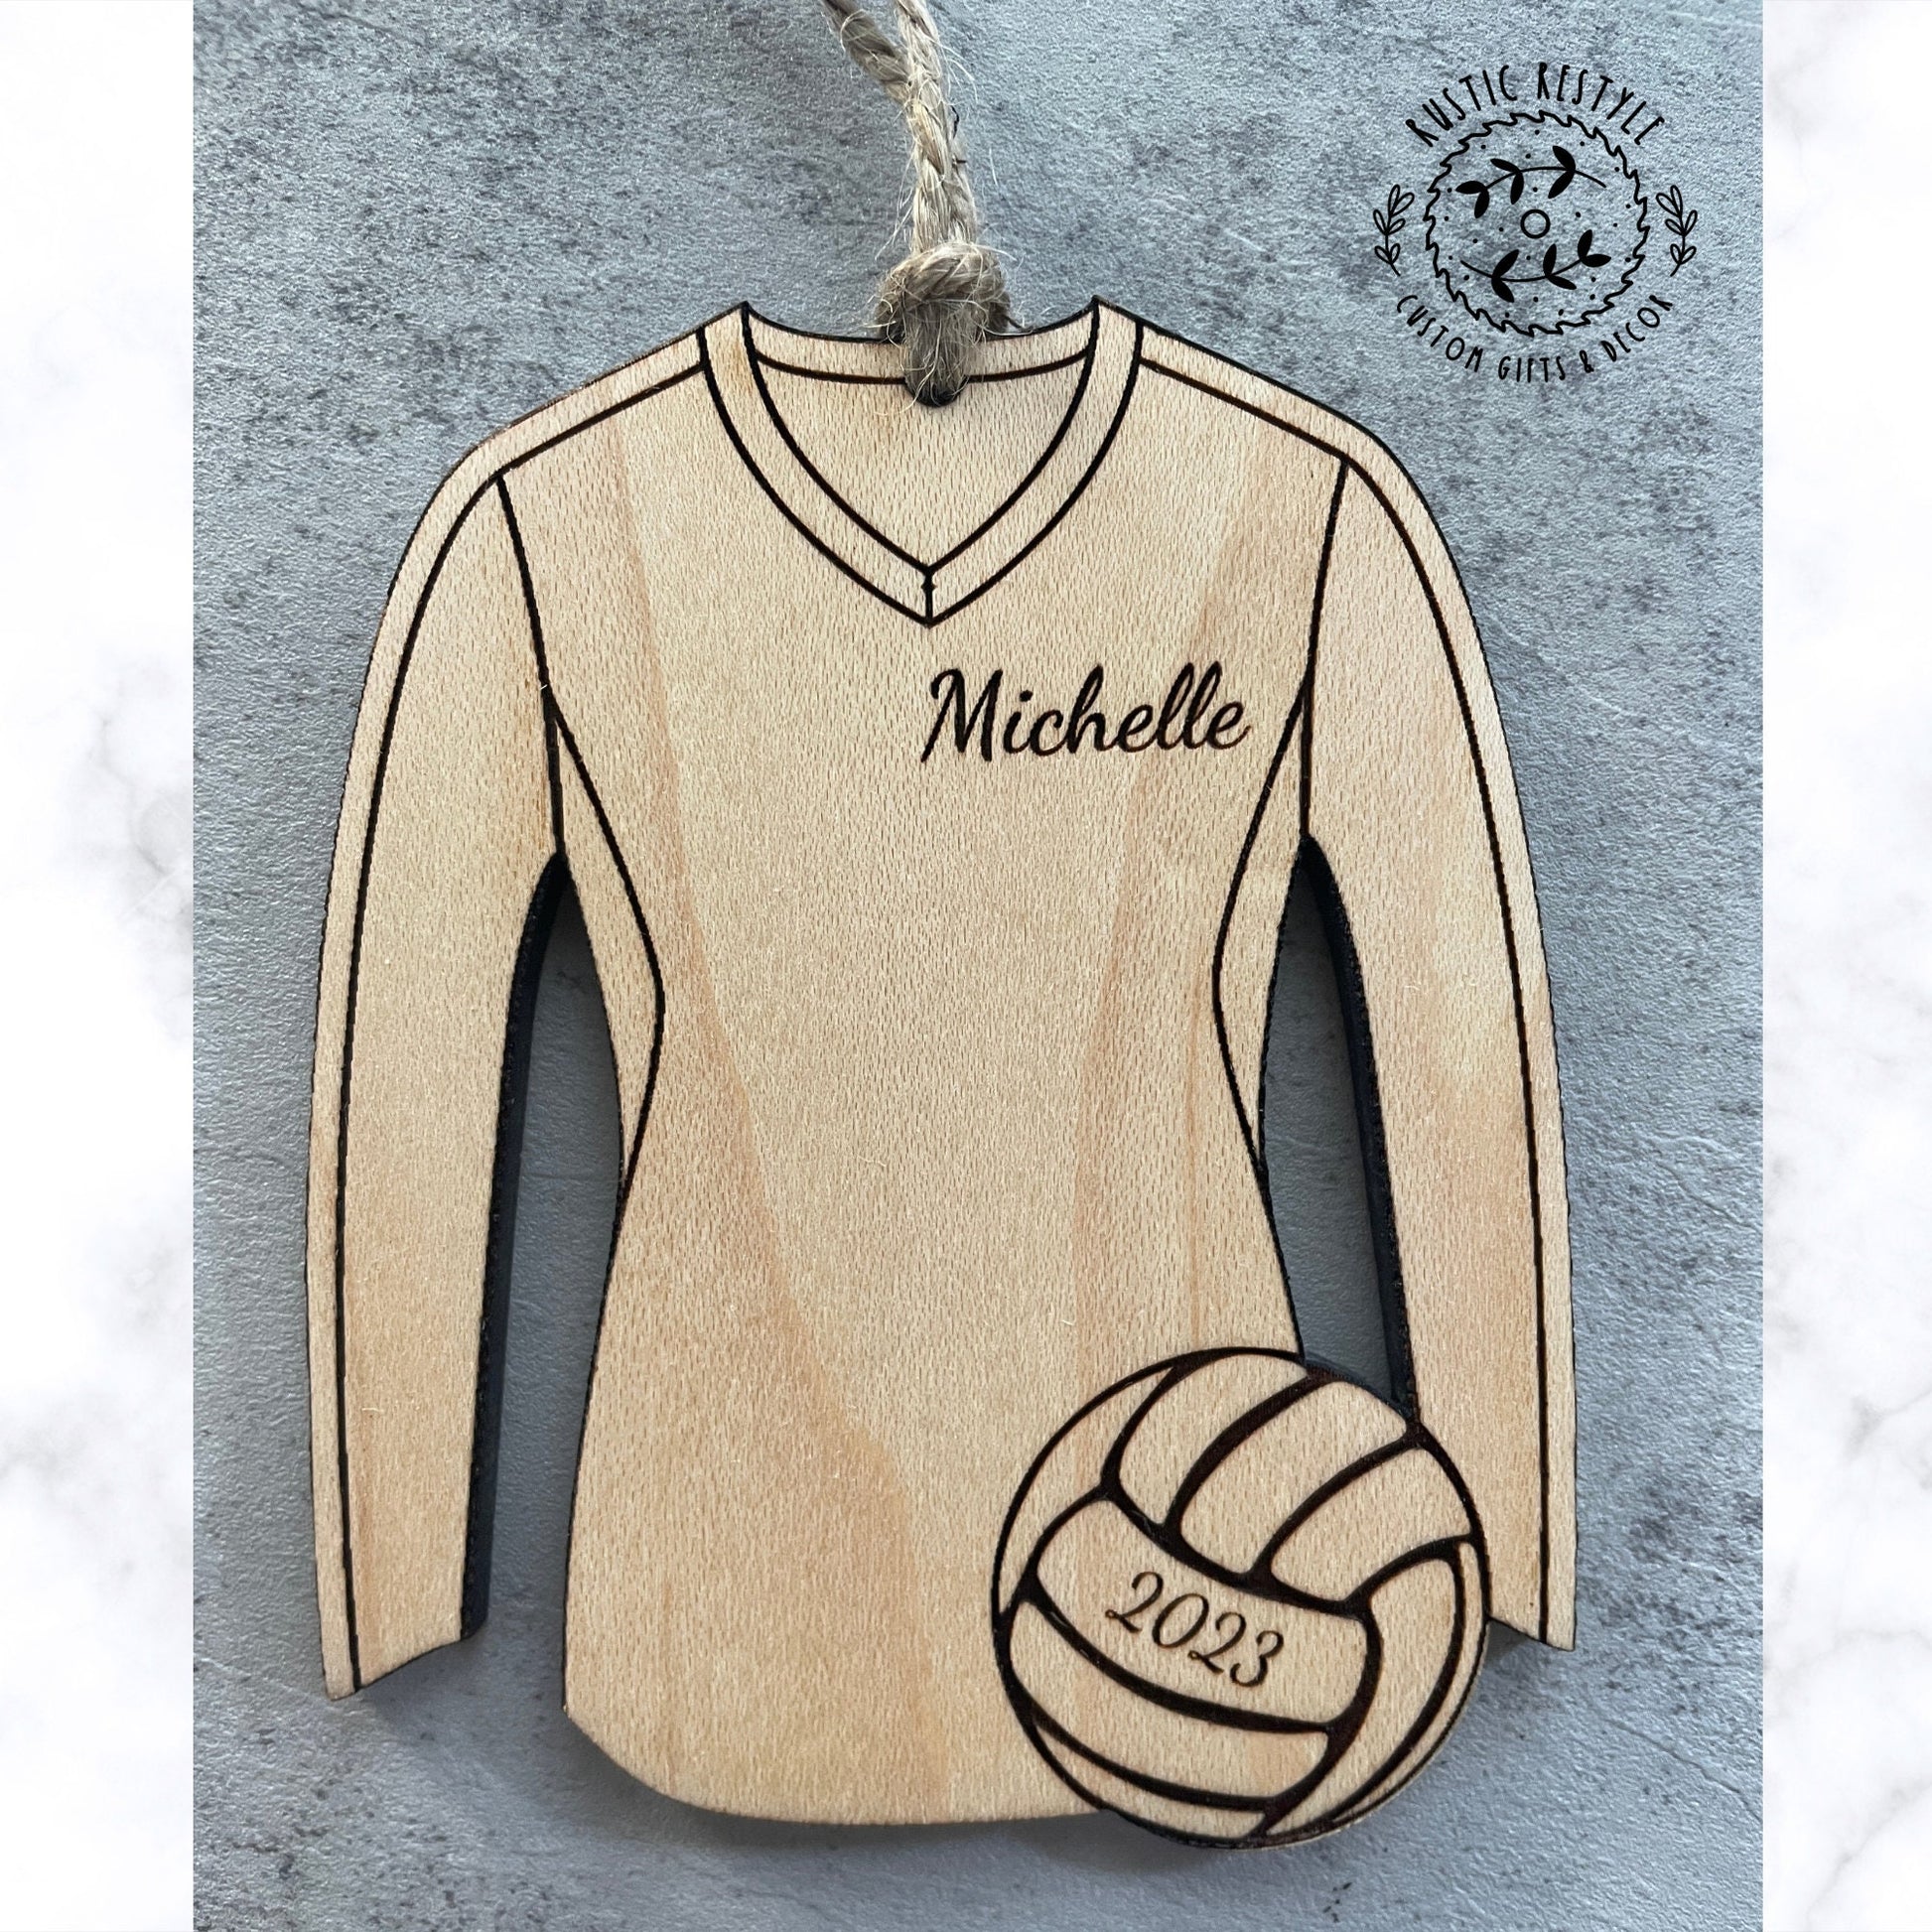 Volleyball Ornament, Personalized wood volleyball ornament